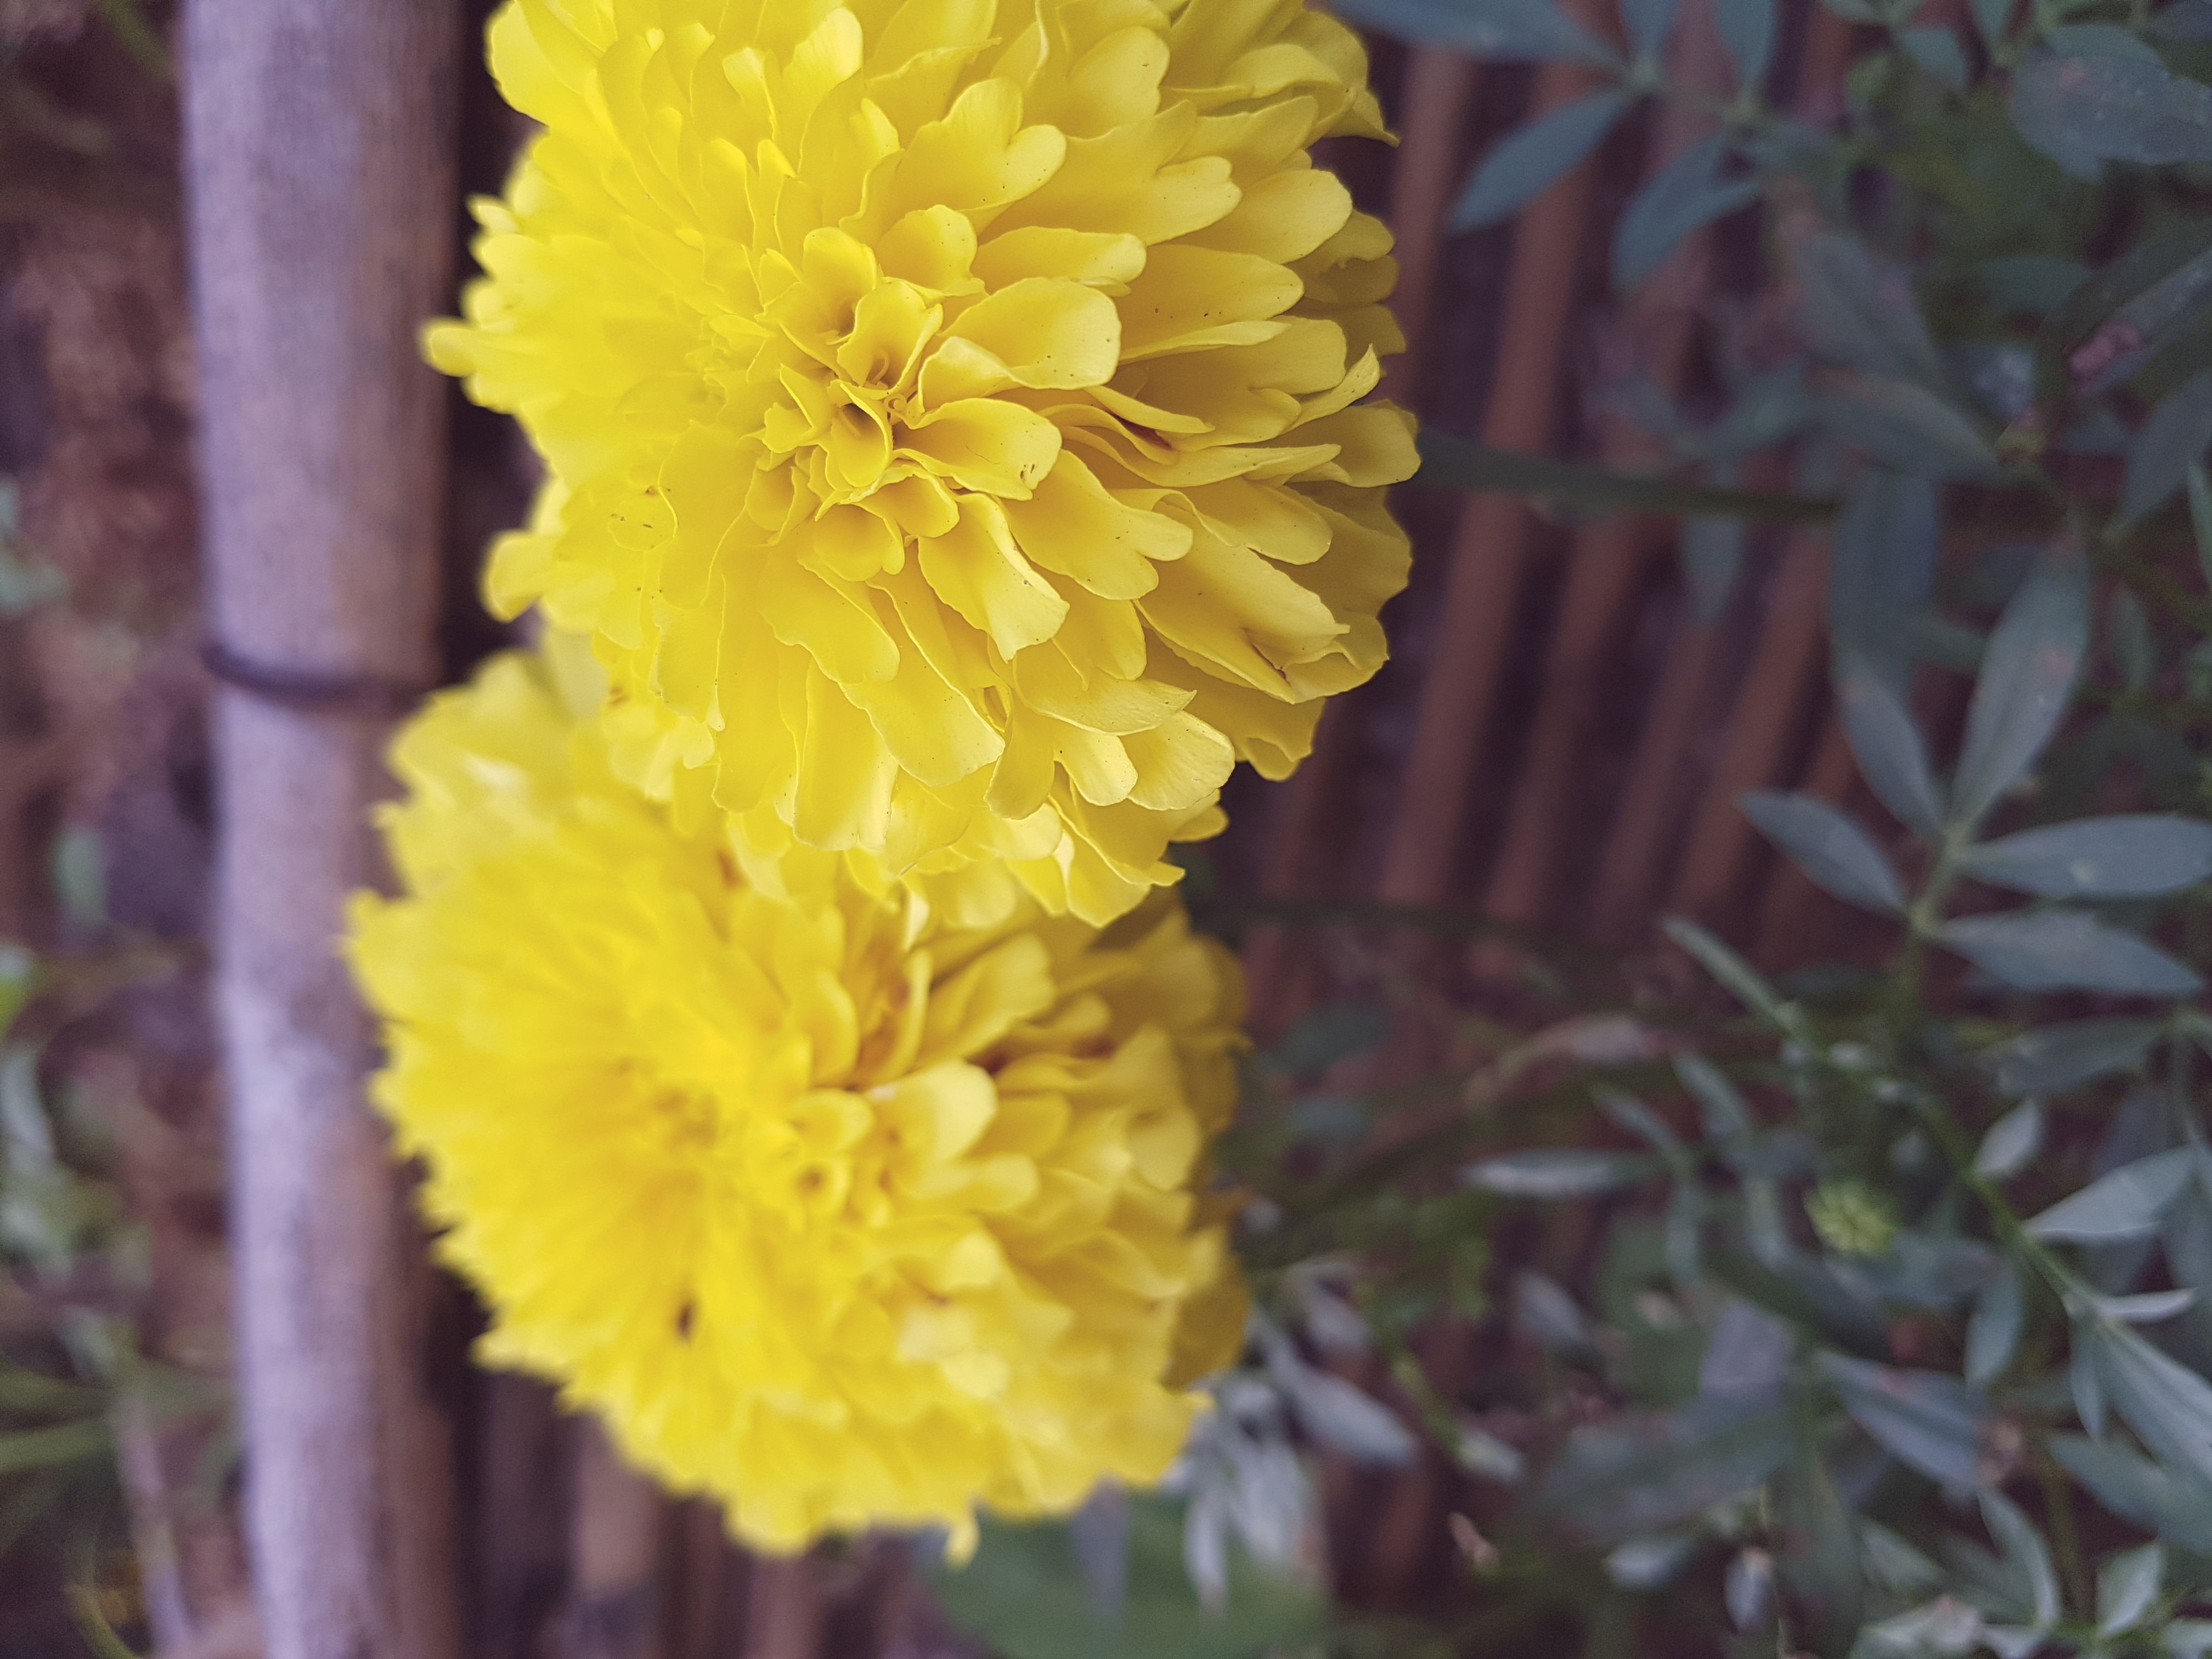 A photograph of a flower taken by me